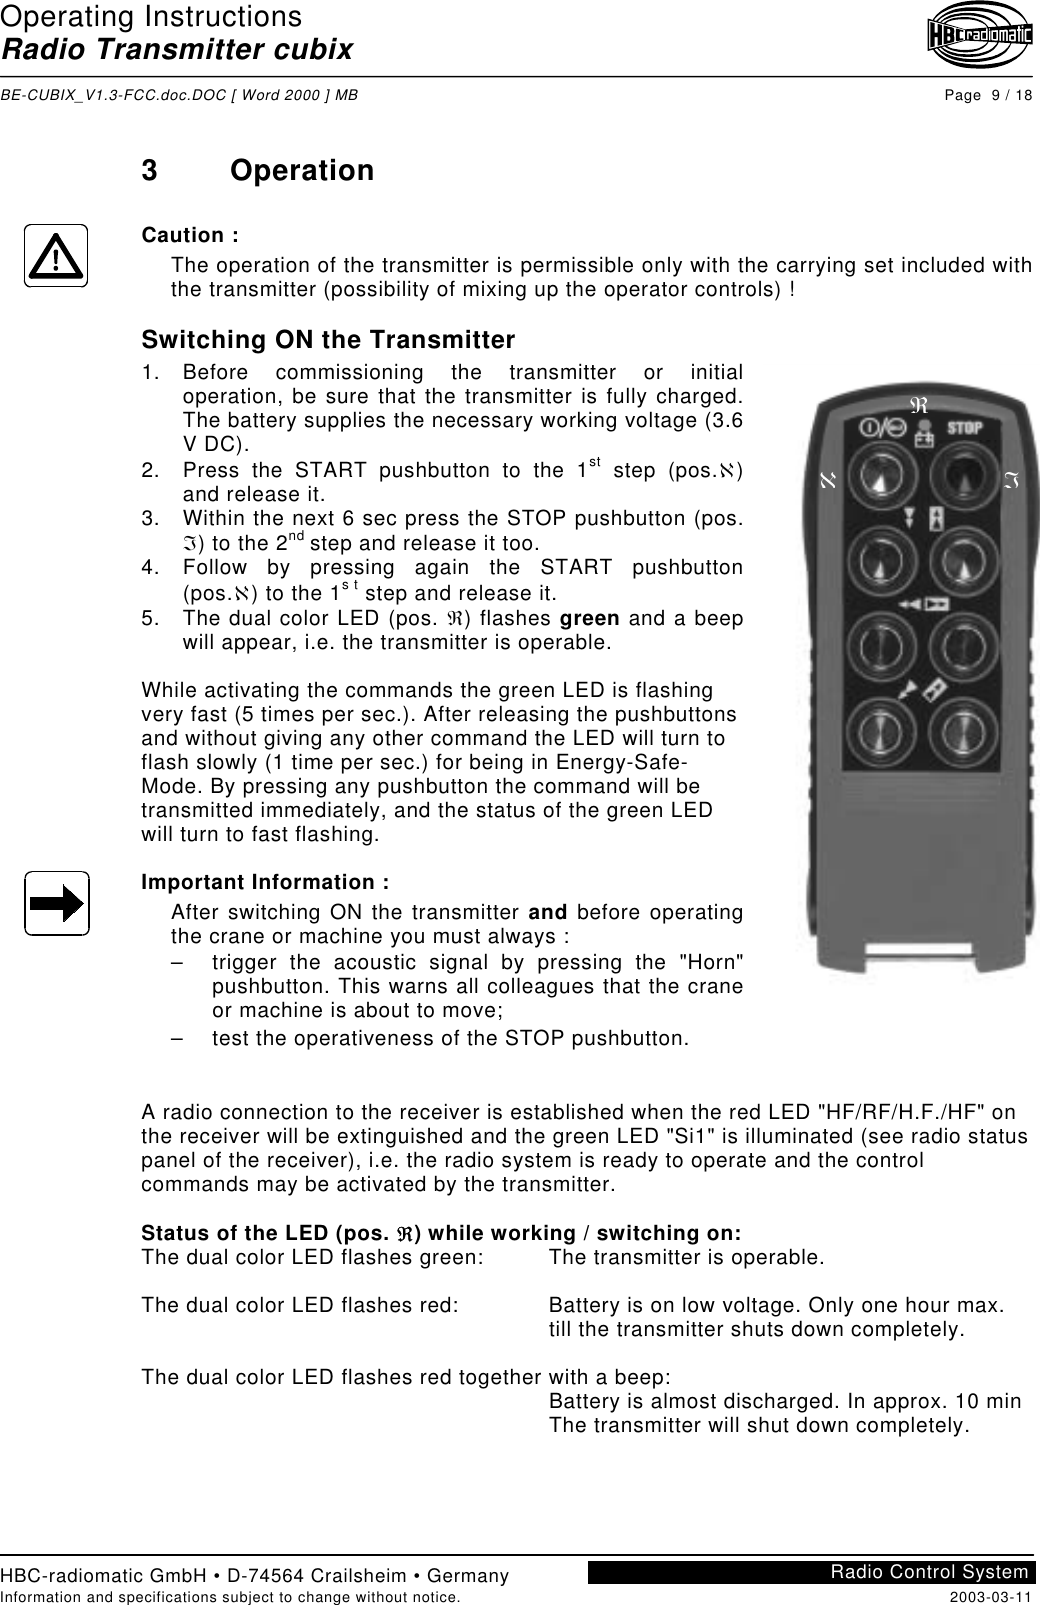 Operating InstructionsRadio Transmitter cubixBE-CUBIX_V1.3-FCC.doc.DOC [ Word 2000 ] MB Page  9 / 18HBC-radiomatic GmbH • D-74564 Crailsheim • GermanyInformation and specifications subject to change without notice. 2003-03-11Radio Control System3 OperationCaution :The operation of the transmitter is permissible only with the carrying set included withthe transmitter (possibility of mixing up the operator controls) !Switching ON the Transmitter1. Before commissioning the transmitter or initialoperation, be sure that the transmitter is fully charged.The battery supplies the necessary working voltage (3.6V DC).2.  Press the START pushbutton to the 1st step (pos.ℵ)and release it.3.  Within the next 6 sec press the STOP pushbutton (pos.ℑ) to the 2nd step and release it too.4. Follow by pressing again the START pushbutton(pos.ℵ) to the 1s t step and release it.5.  The dual color LED (pos. ℜ) flashes green and a beepwill appear, i.e. the transmitter is operable.While activating the commands the green LED is flashingvery fast (5 times per sec.). After releasing the pushbuttonsand without giving any other command the LED will turn toflash slowly (1 time per sec.) for being in Energy-Safe-Mode. By pressing any pushbutton the command will betransmitted immediately, and the status of the green LEDwill turn to fast flashing.Important Information :After switching ON the transmitter and before operatingthe crane or machine you must always :–  trigger the acoustic signal by pressing the &quot;Horn&quot;pushbutton. This warns all colleagues that the craneor machine is about to move;–  test the operativeness of the STOP pushbutton.A radio connection to the receiver is established when the red LED &quot;HF/RF/H.F./HF&quot; onthe receiver will be extinguished and the green LED &quot;Si1&quot; is illuminated (see radio statuspanel of the receiver), i.e. the radio system is ready to operate and the controlcommands may be activated by the transmitter.Status of the LED (pos. ℜ) while working / switching on:The dual color LED flashes green:  The transmitter is operable.The dual color LED flashes red: Battery is on low voltage. Only one hour max.  till the transmitter shuts down completely.The dual color LED flashes red together with a beep:  Battery is almost discharged. In approx. 10 minThe transmitter will shut down completely.ℵℑℜ